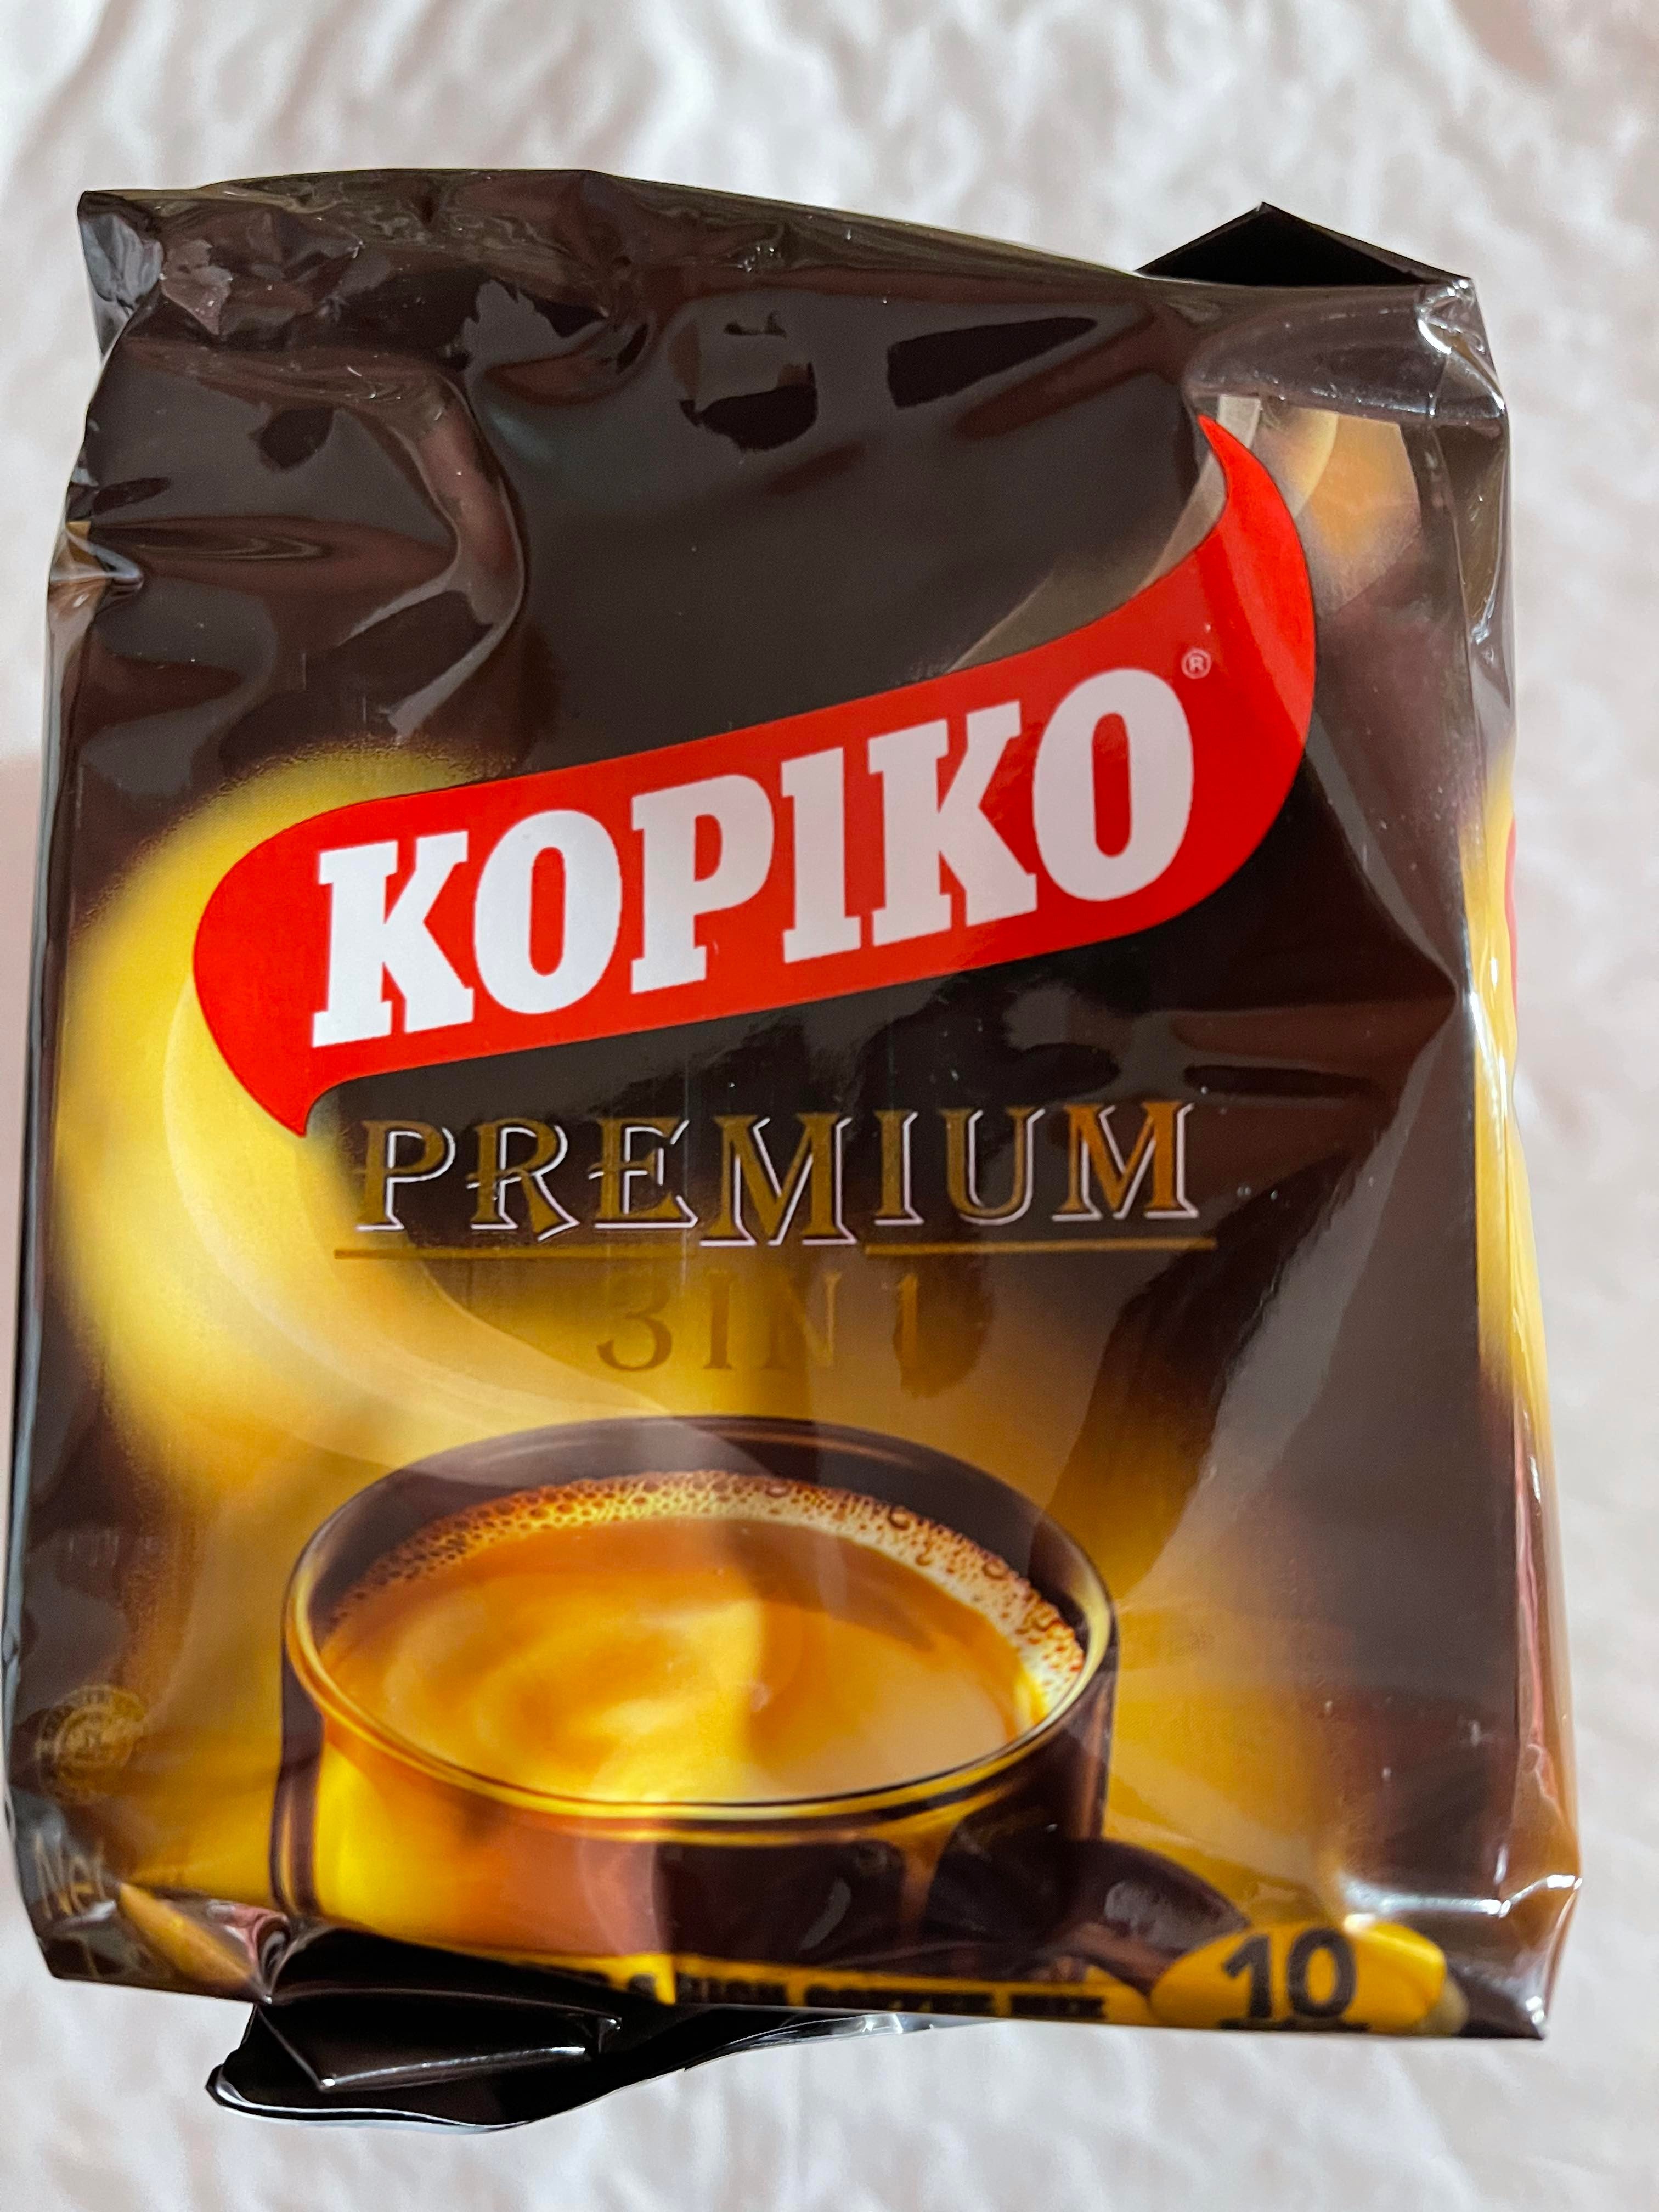 KOPIKO PREMIUM - 3 in 1 STRONG & RICH INSTANT COFFEE MIX - 10 Sachets (7.1 oz)